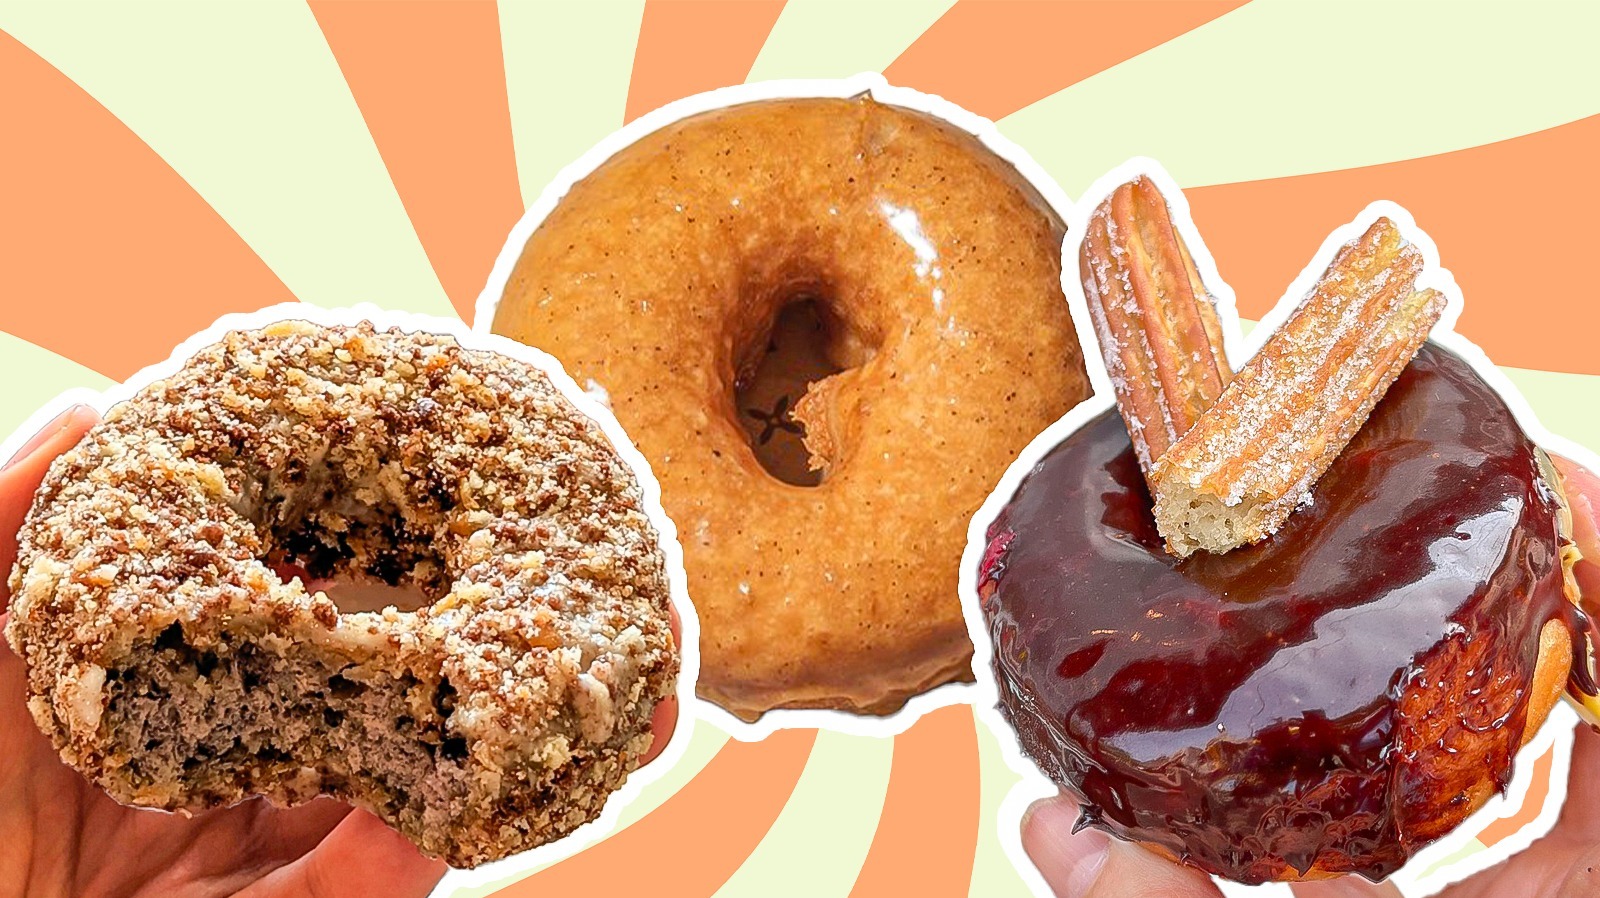 The Most Popular Donuts in each U.S. State